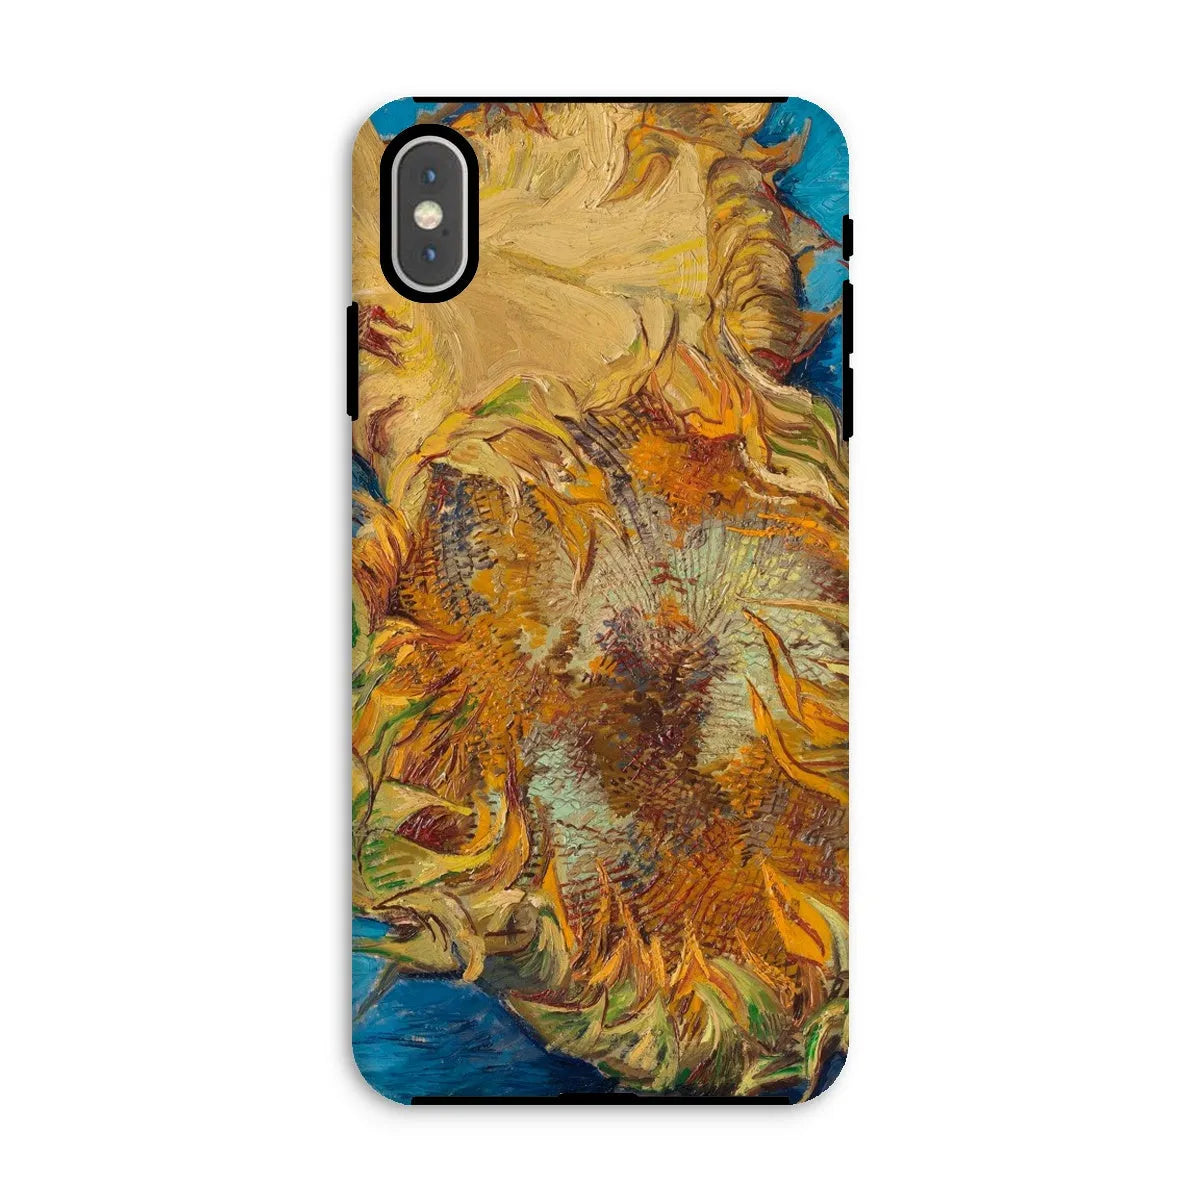 Sunflowers - Post Impressionist Phone Case - Vincent Van Gogh - Iphone Xs Max / Matte - Mobile Phone Cases - Aesthetic